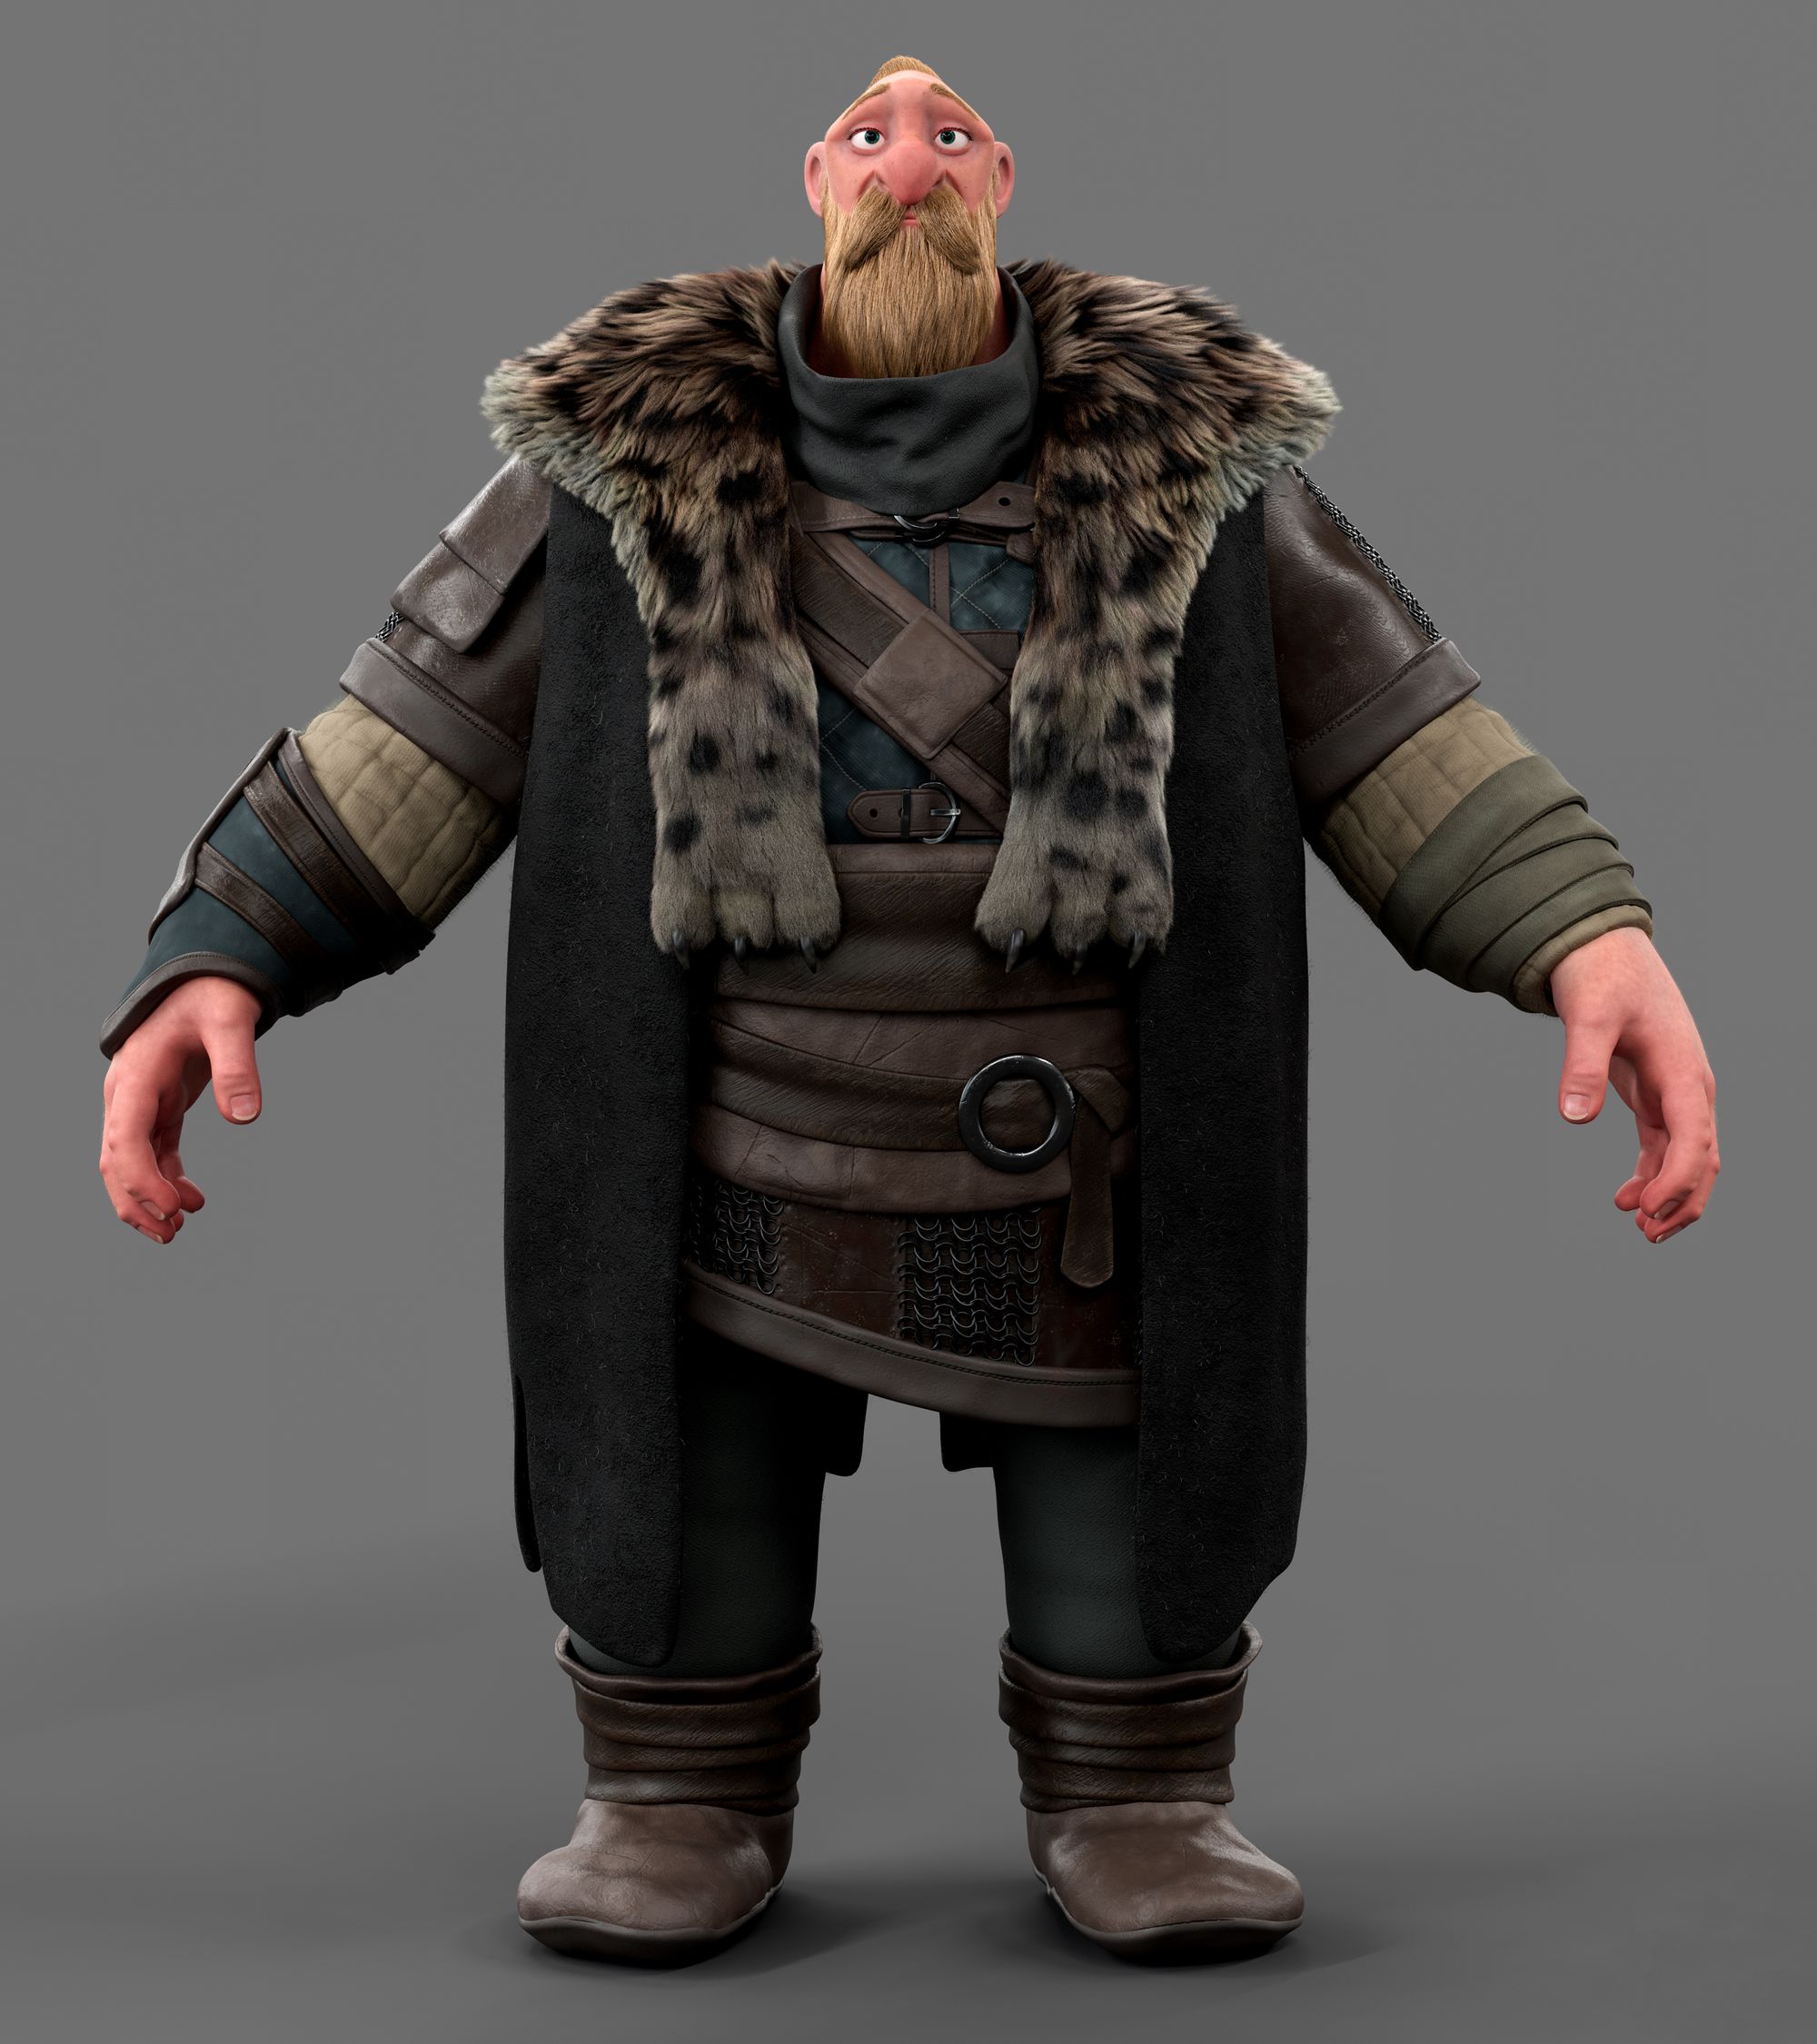 Brokkr, a 3D character model, is shown in front view. The image highlights the character's precise and detailed final textures, including the fur, skin, and clothing.